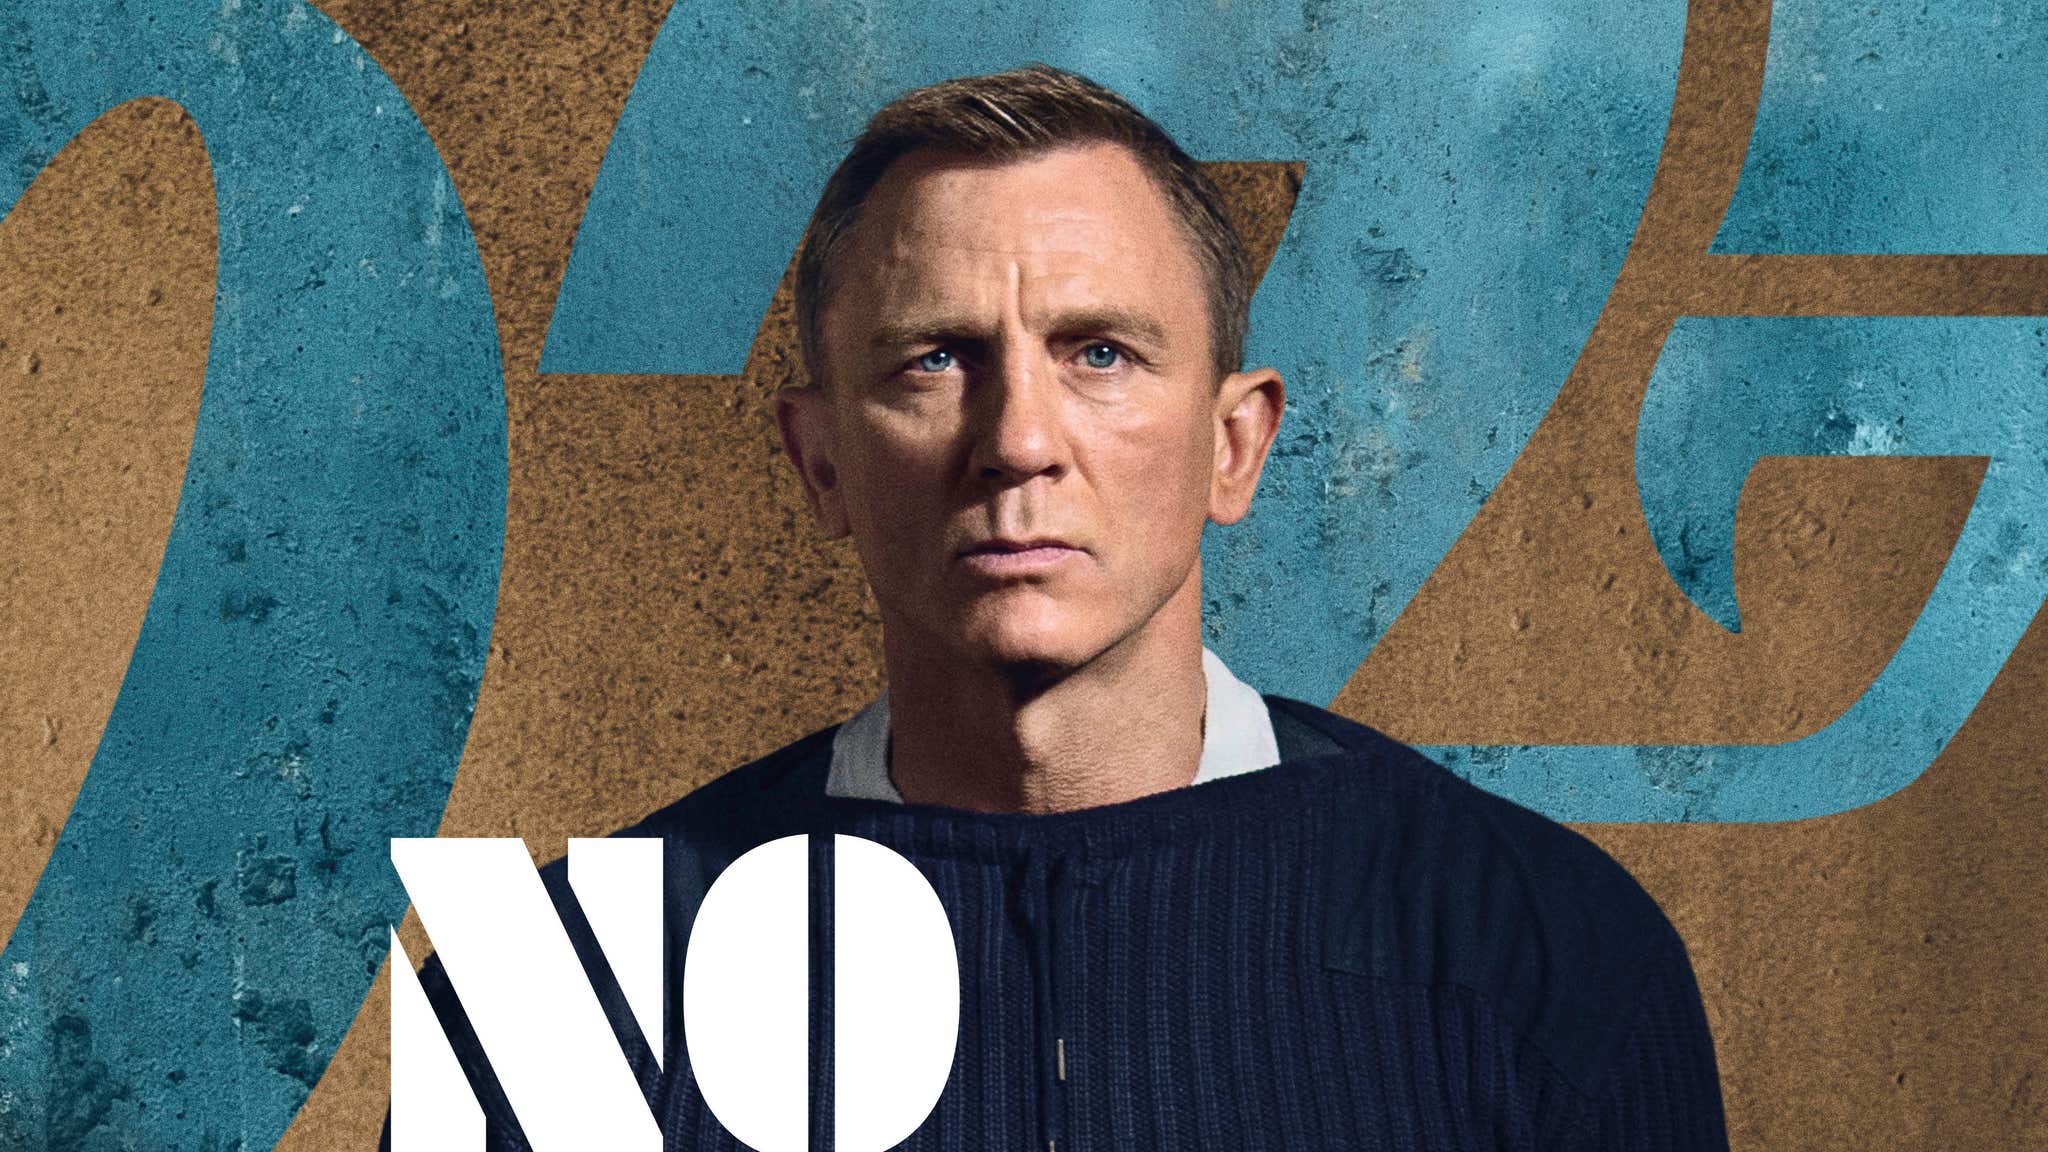 James Bond Is Ready for Action In No Time to Die Character Posters